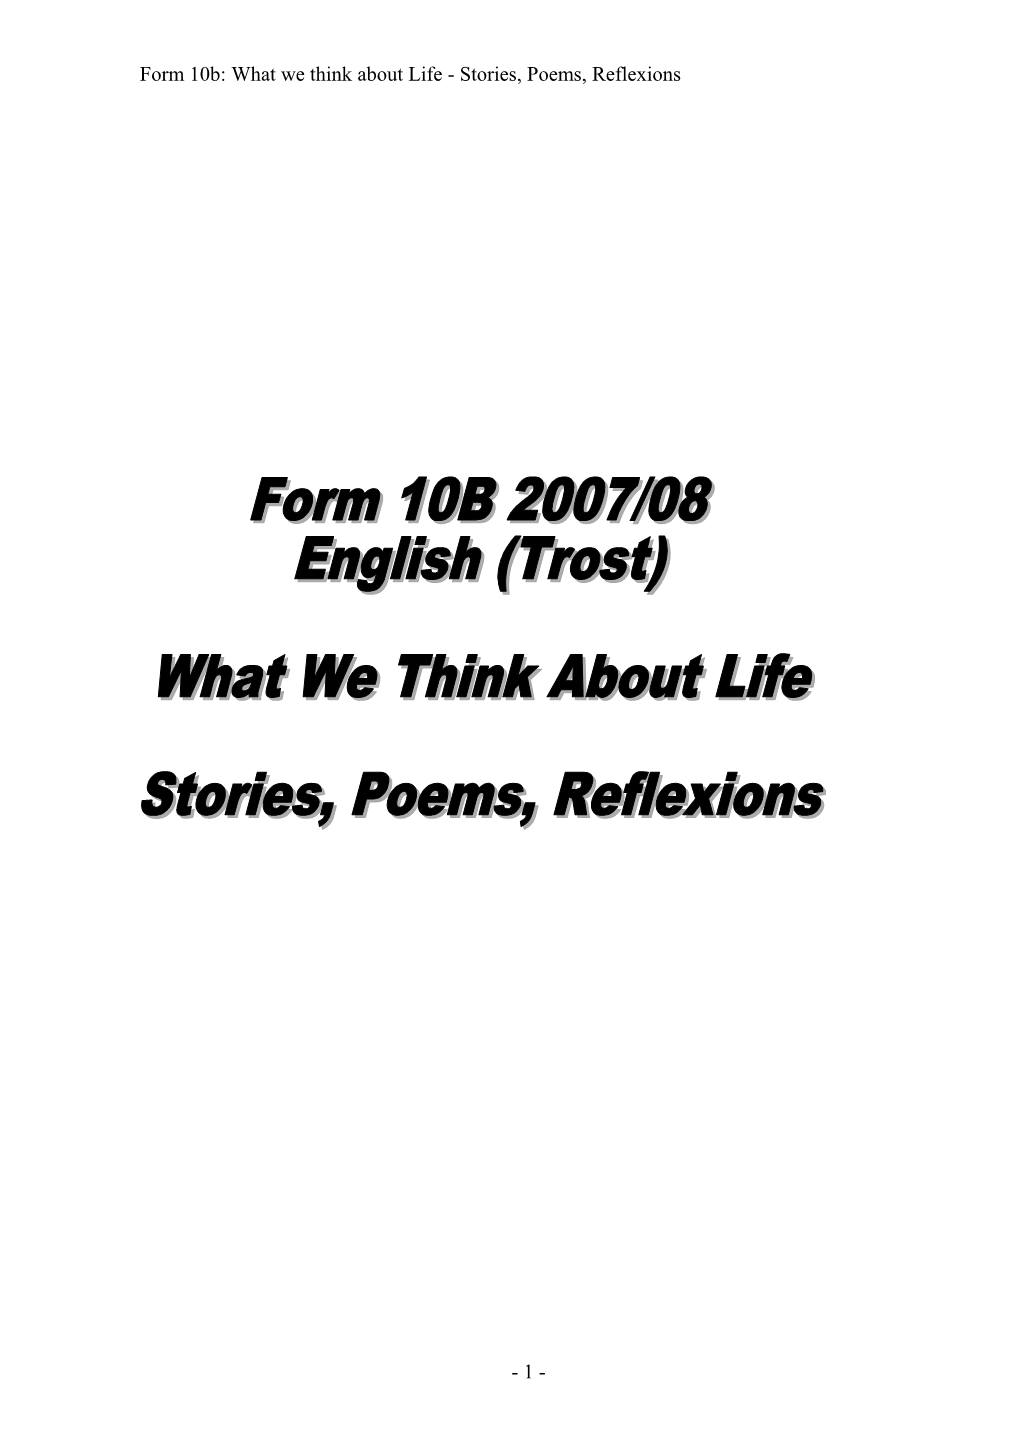 Form 10B: What We Think About Life - Stories, Poems, Reflexions